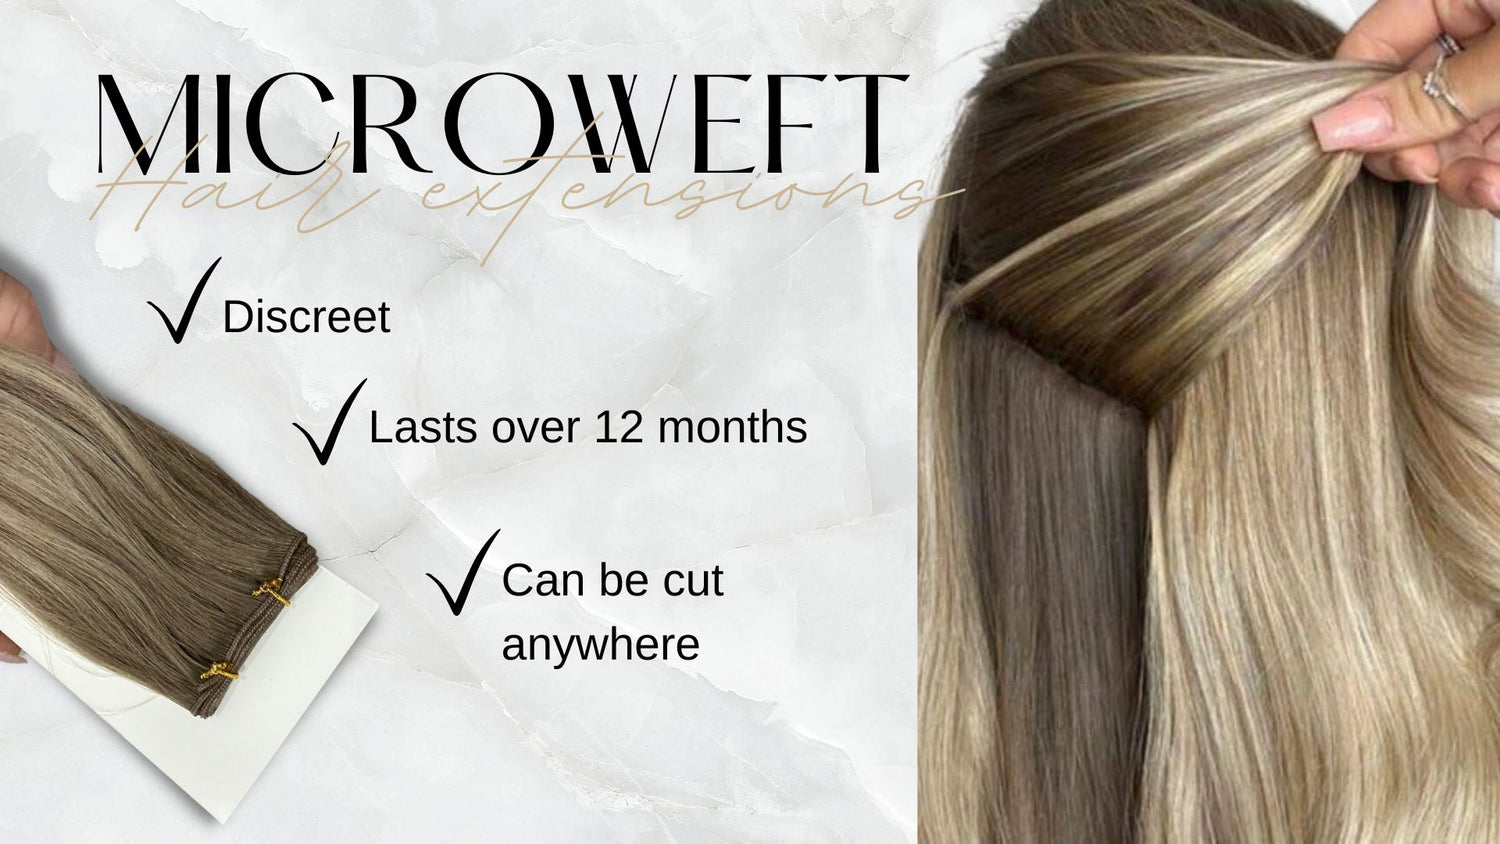 Microwefts